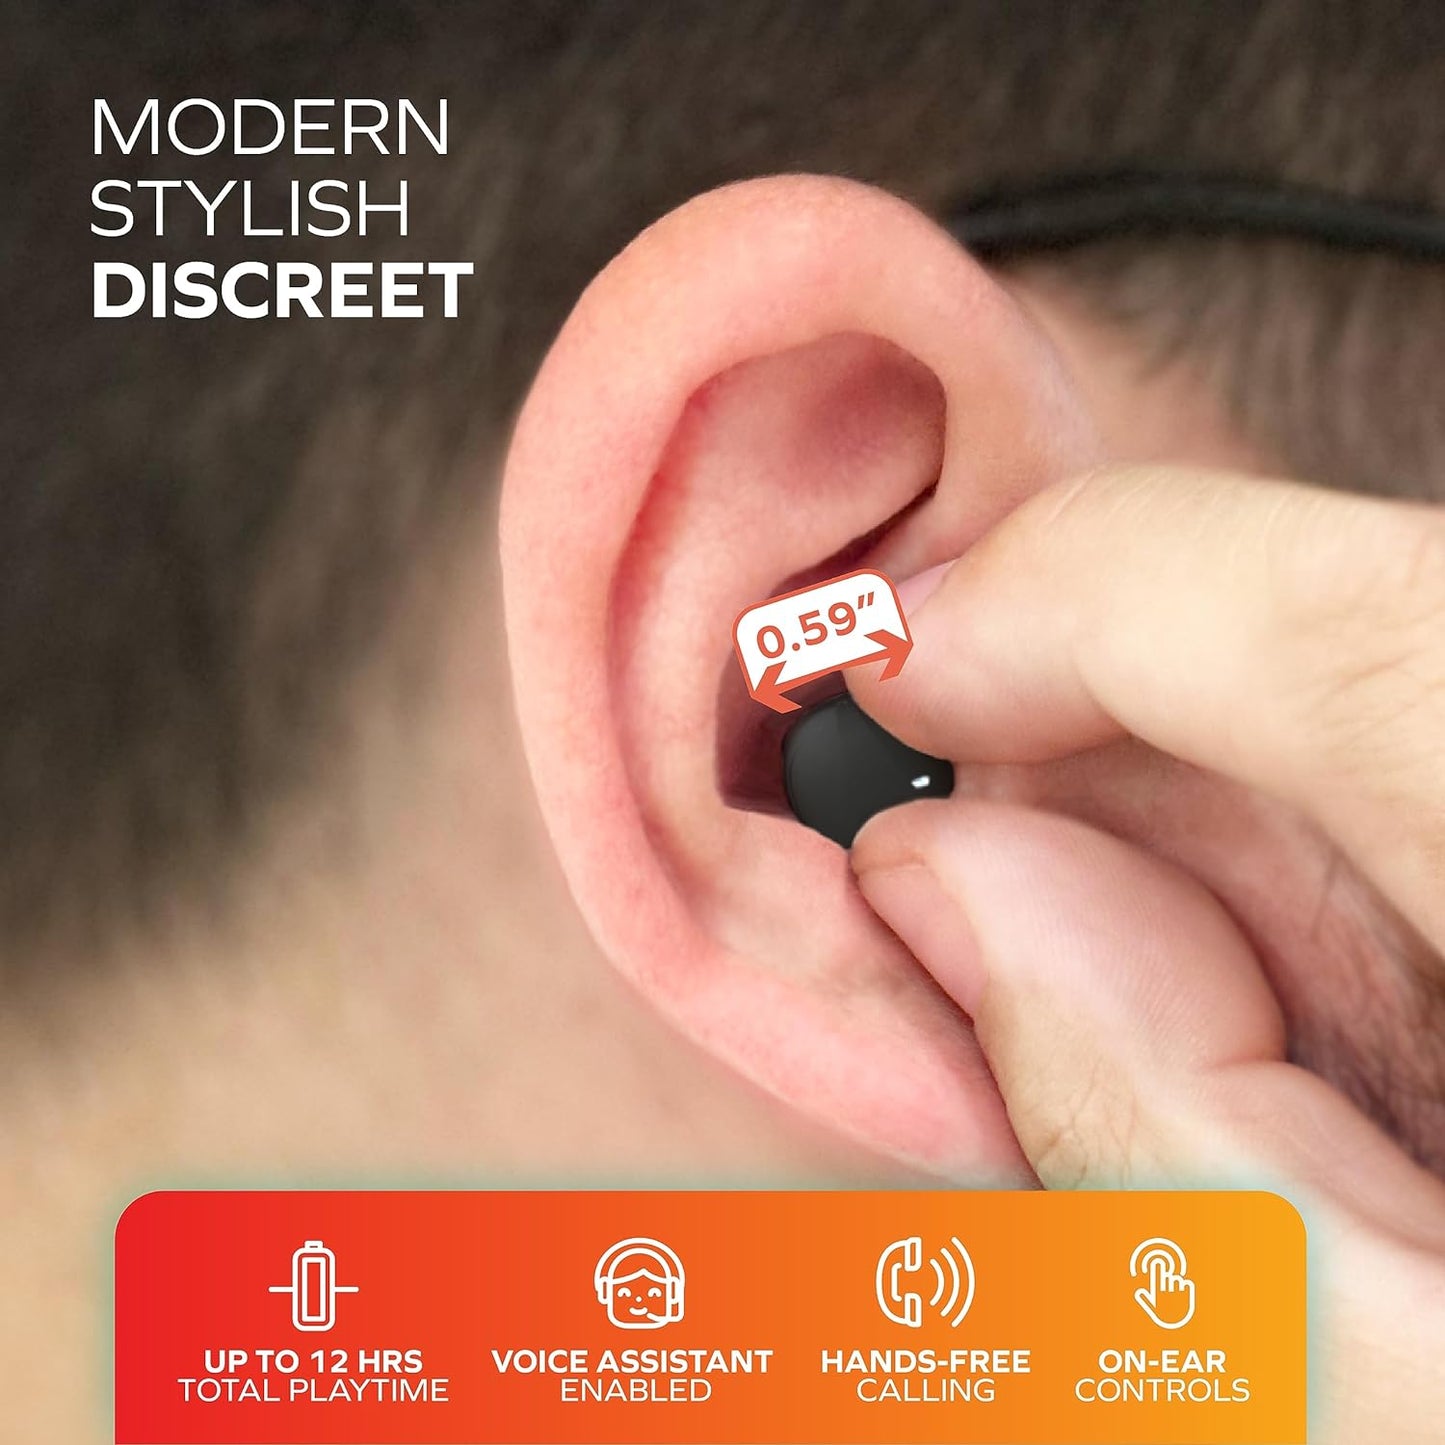 Worlds Smallest Earbuds - CETW536